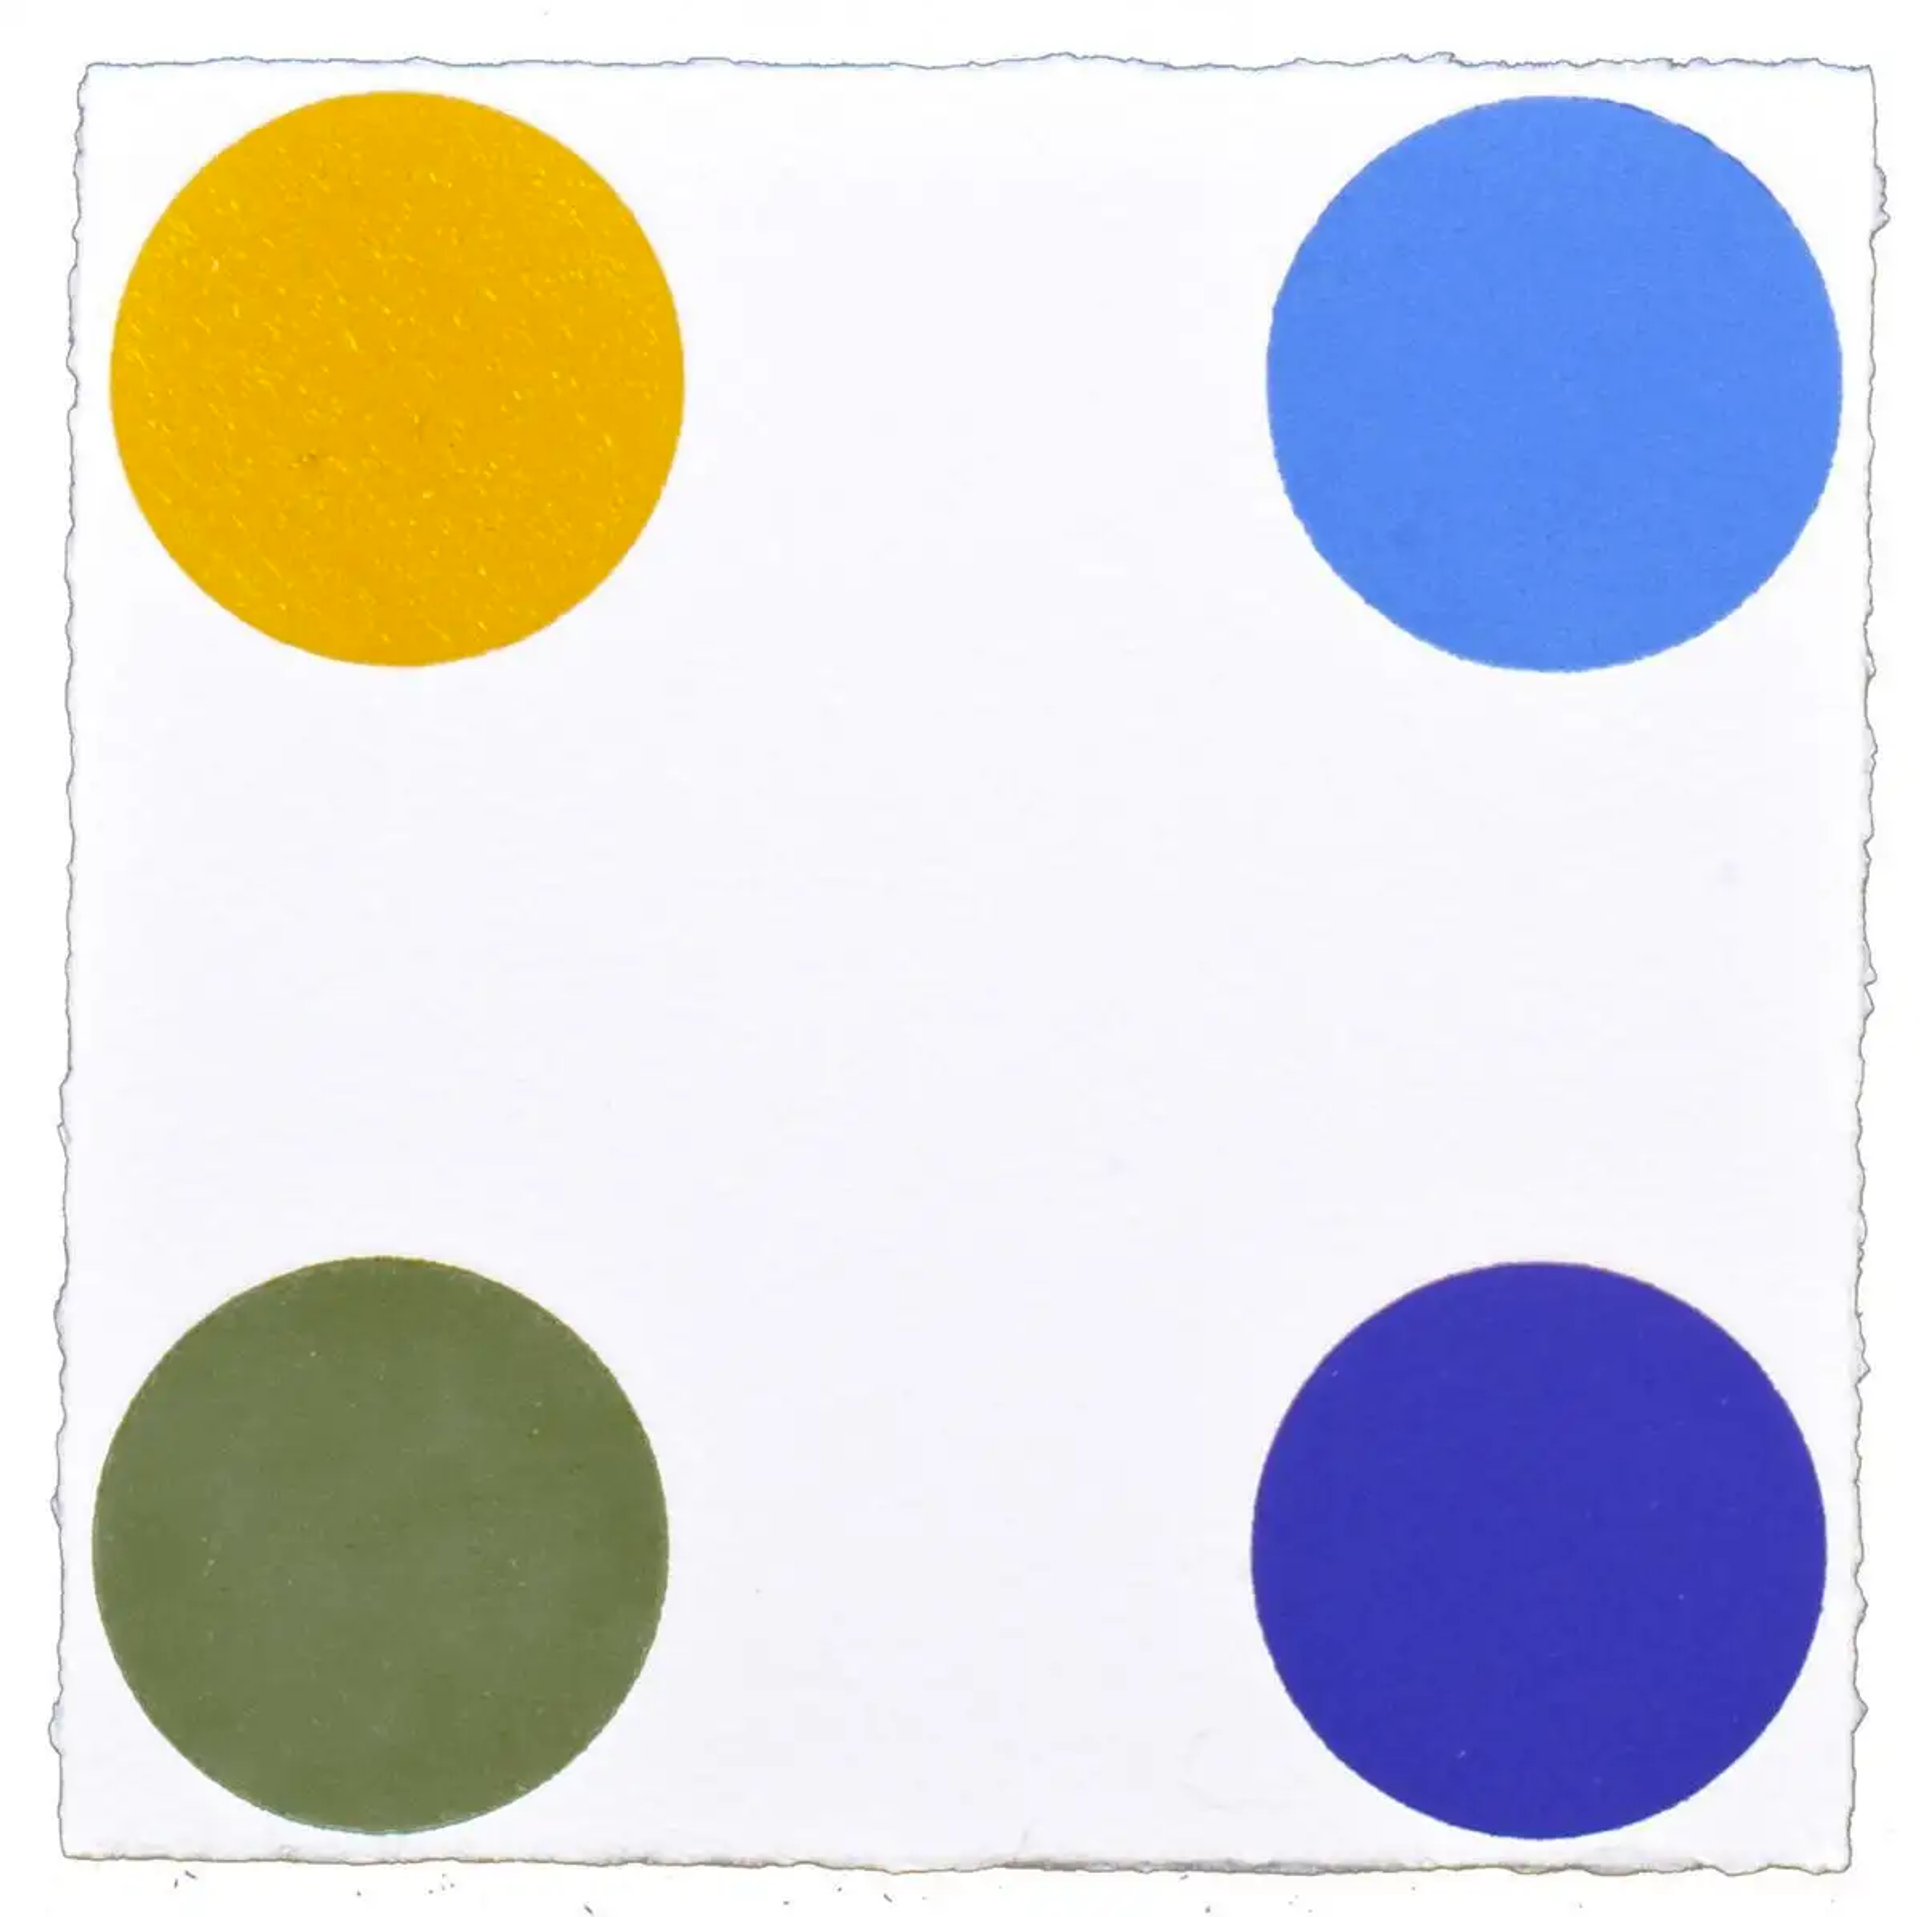 The print is a square composition with four circles positioned in each corner. Set against a plain white backdrop, the spots are depicted in flattened colours of yellow, sky blue, khaki green and royal blue.